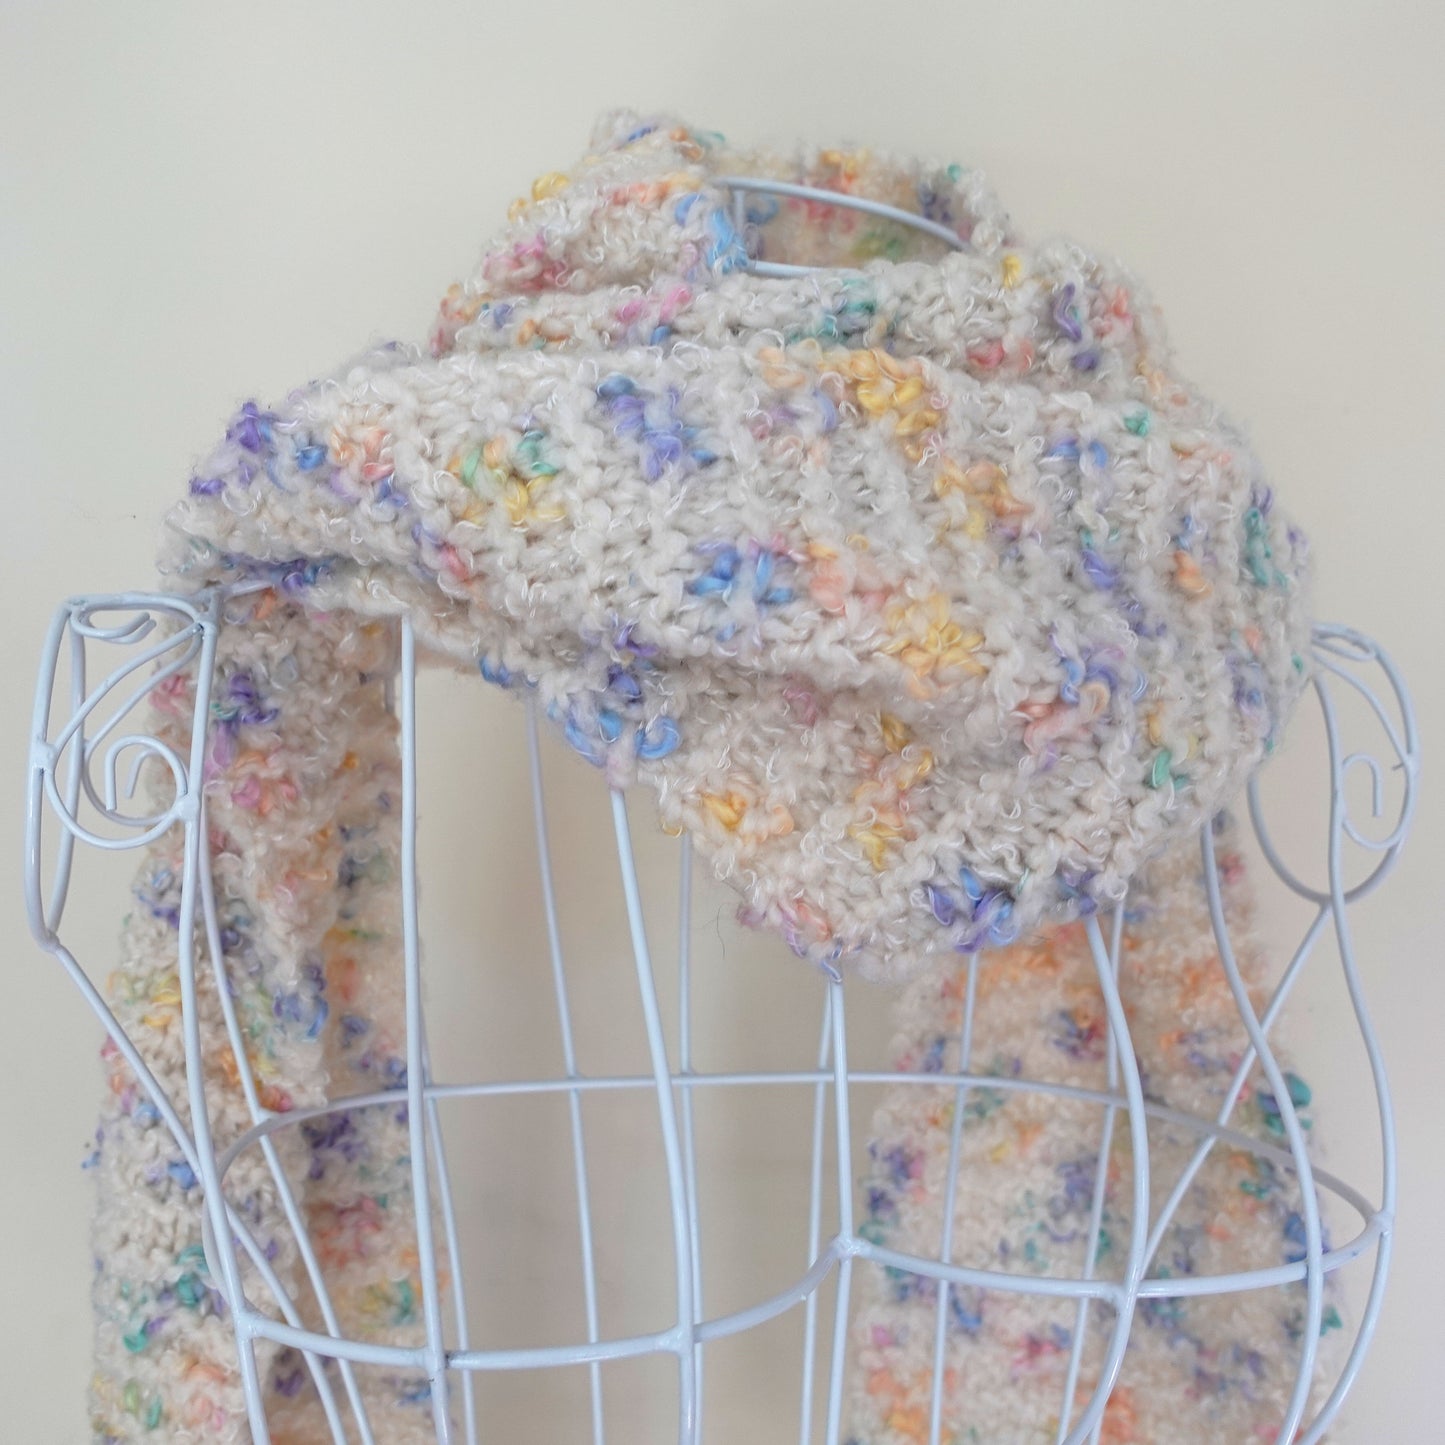 pastel handmade knitted scarf